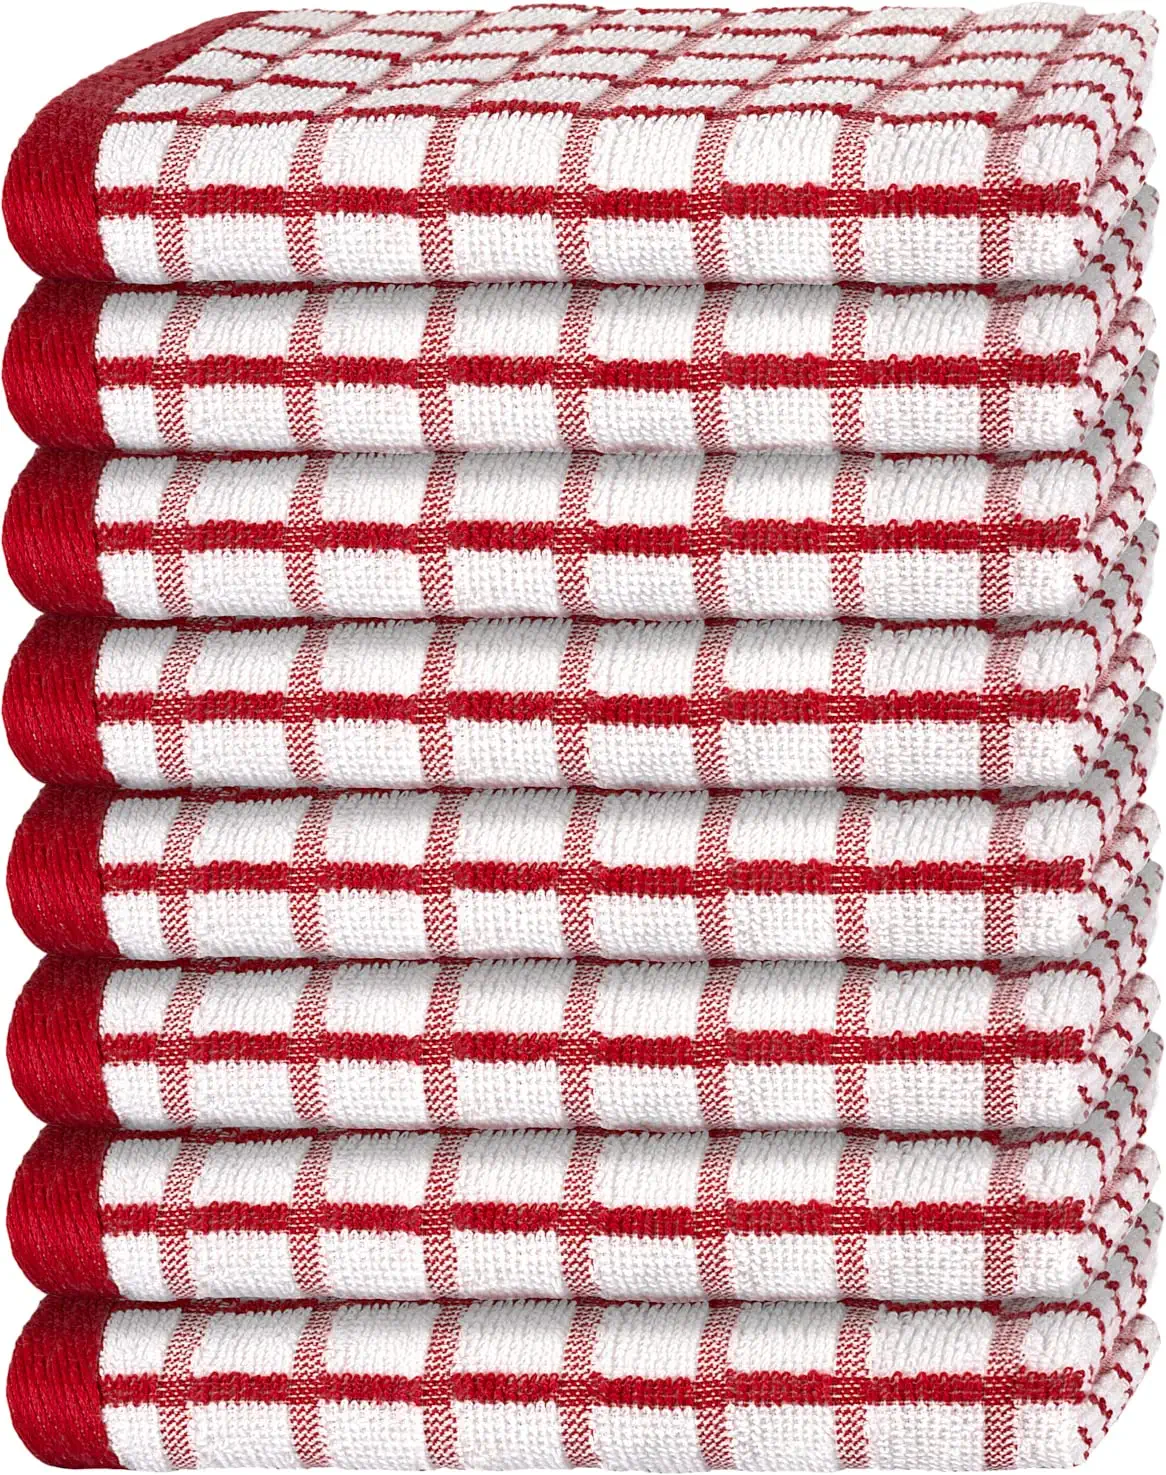 Kitchen Towels Set of 3, Cotton Dish Towels, Farmhouse Tea Towels, Red Checkered  Kitchen Towels, Bulk Hand Towel, Kitchen Decor, Red/white 